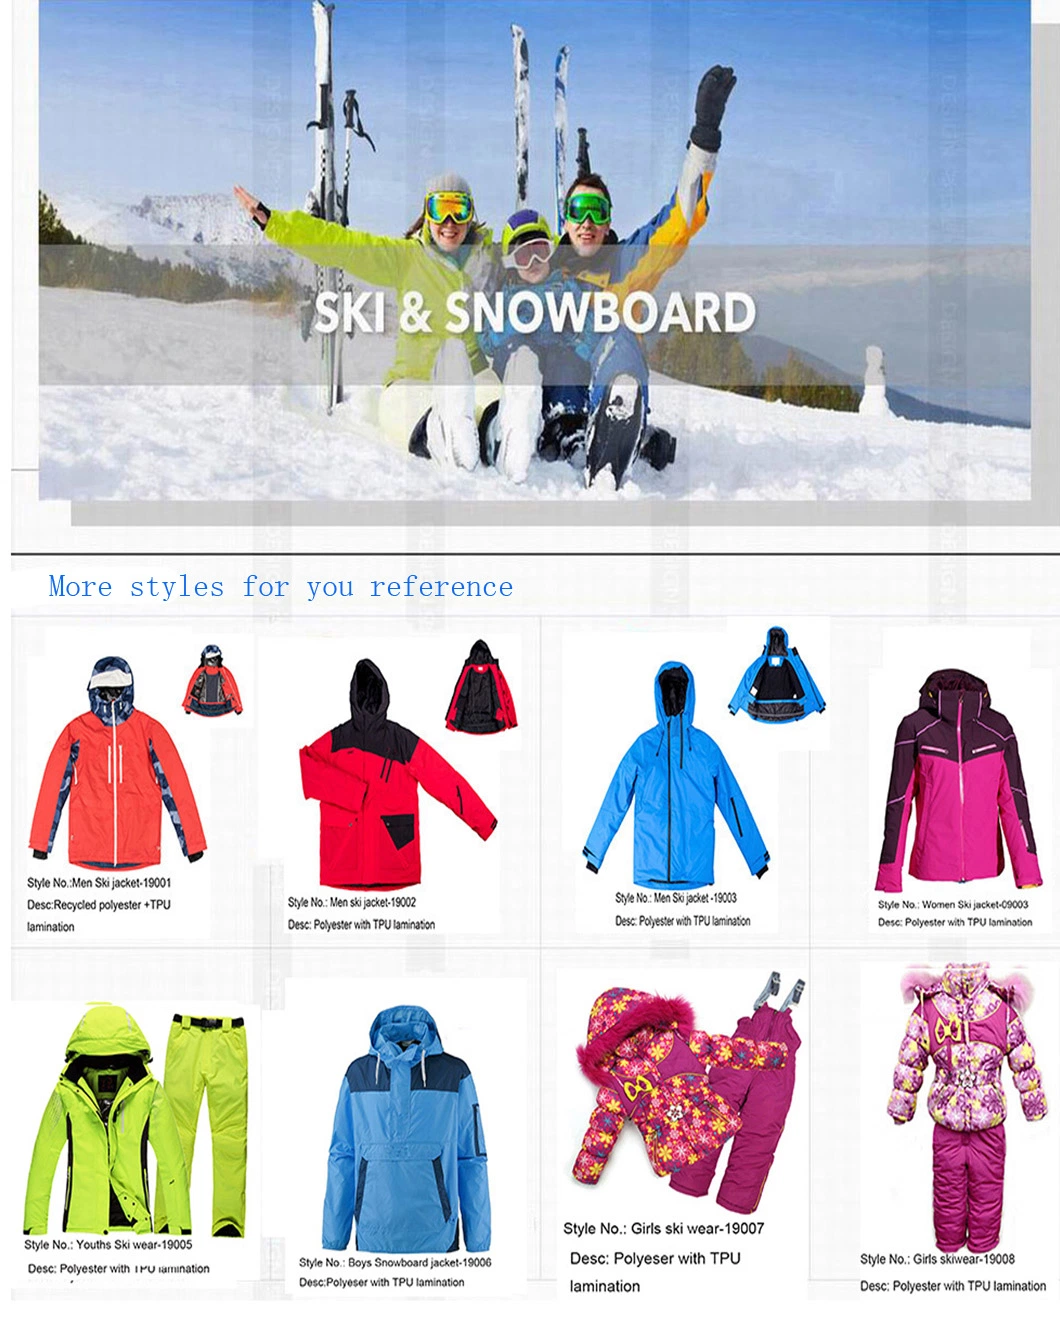 Pink Color Girls Woman Suits Winter Waterproof Clothing Ski Jackets and Pants